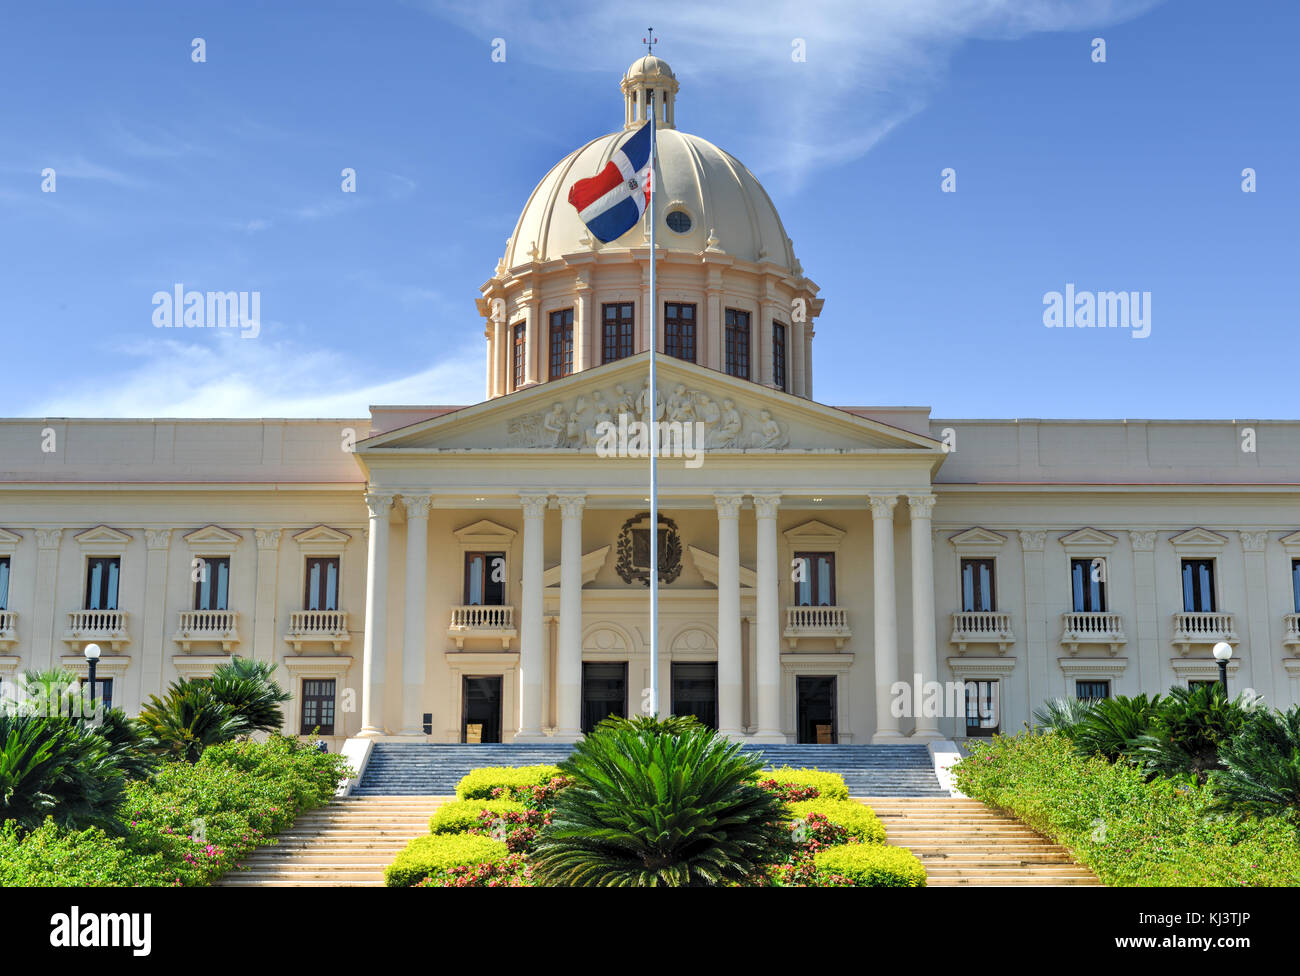 The National Palace in Santo Domingo houses the offices of the Executive Branch (Presidency and Vice-Presidency) of the Dominican Republic. Stock Photo